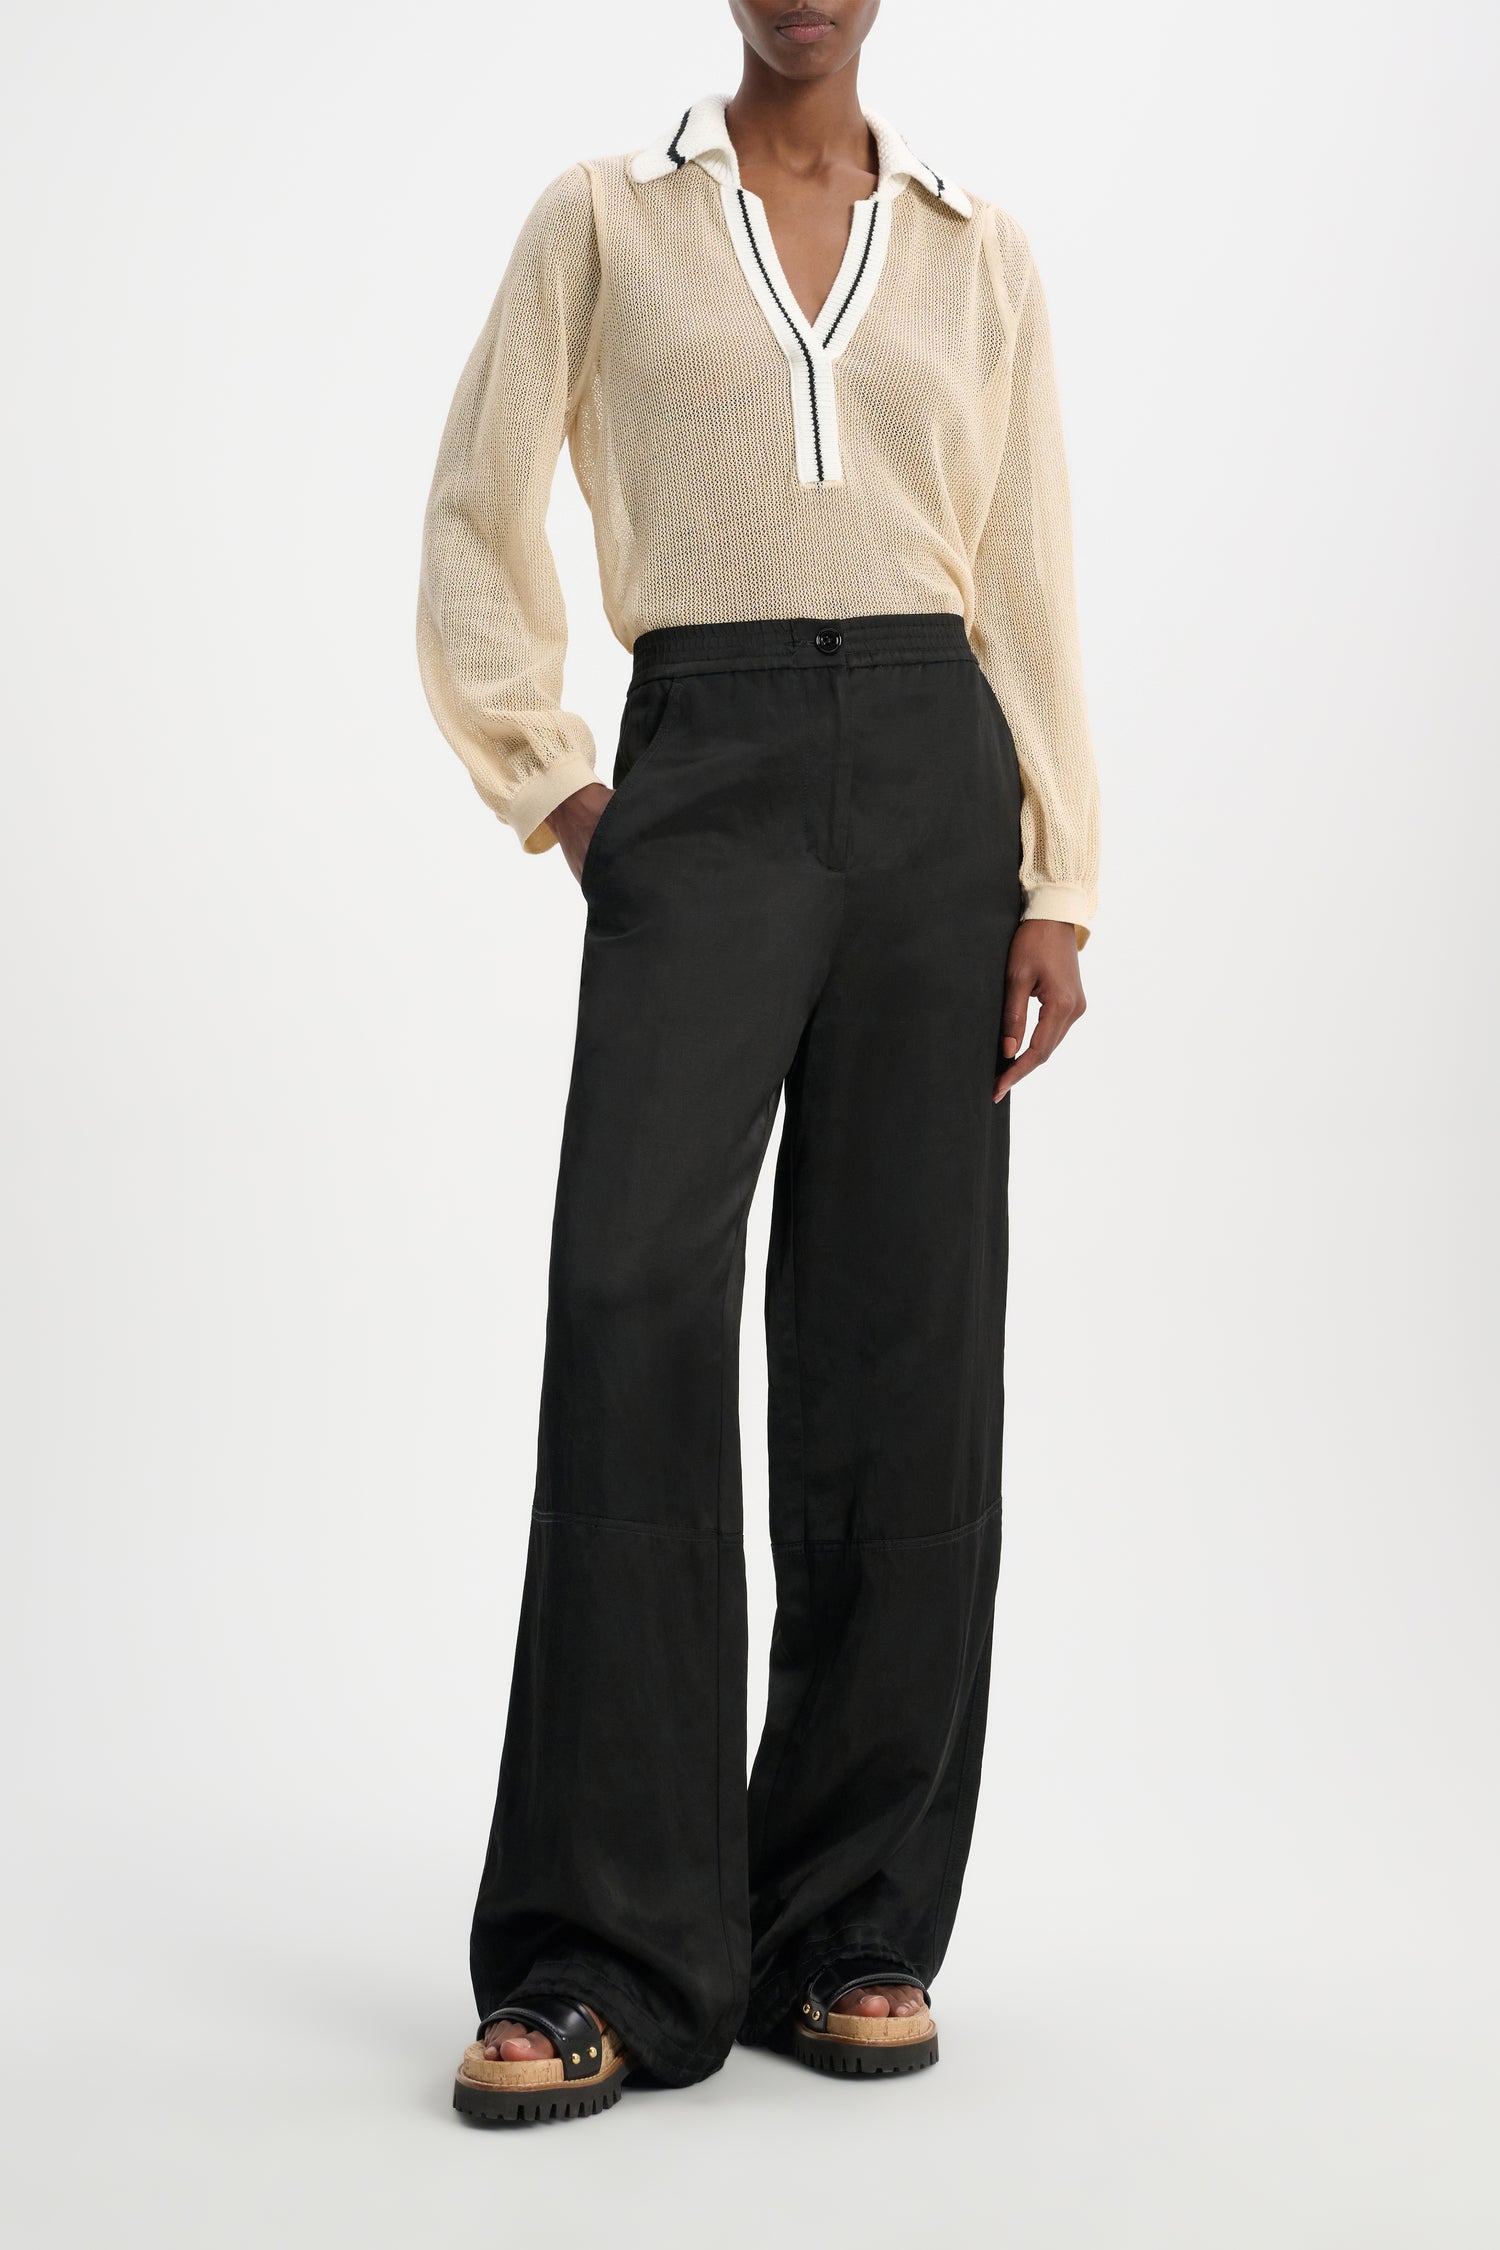 SLOUCHY COOLNESS pants, black